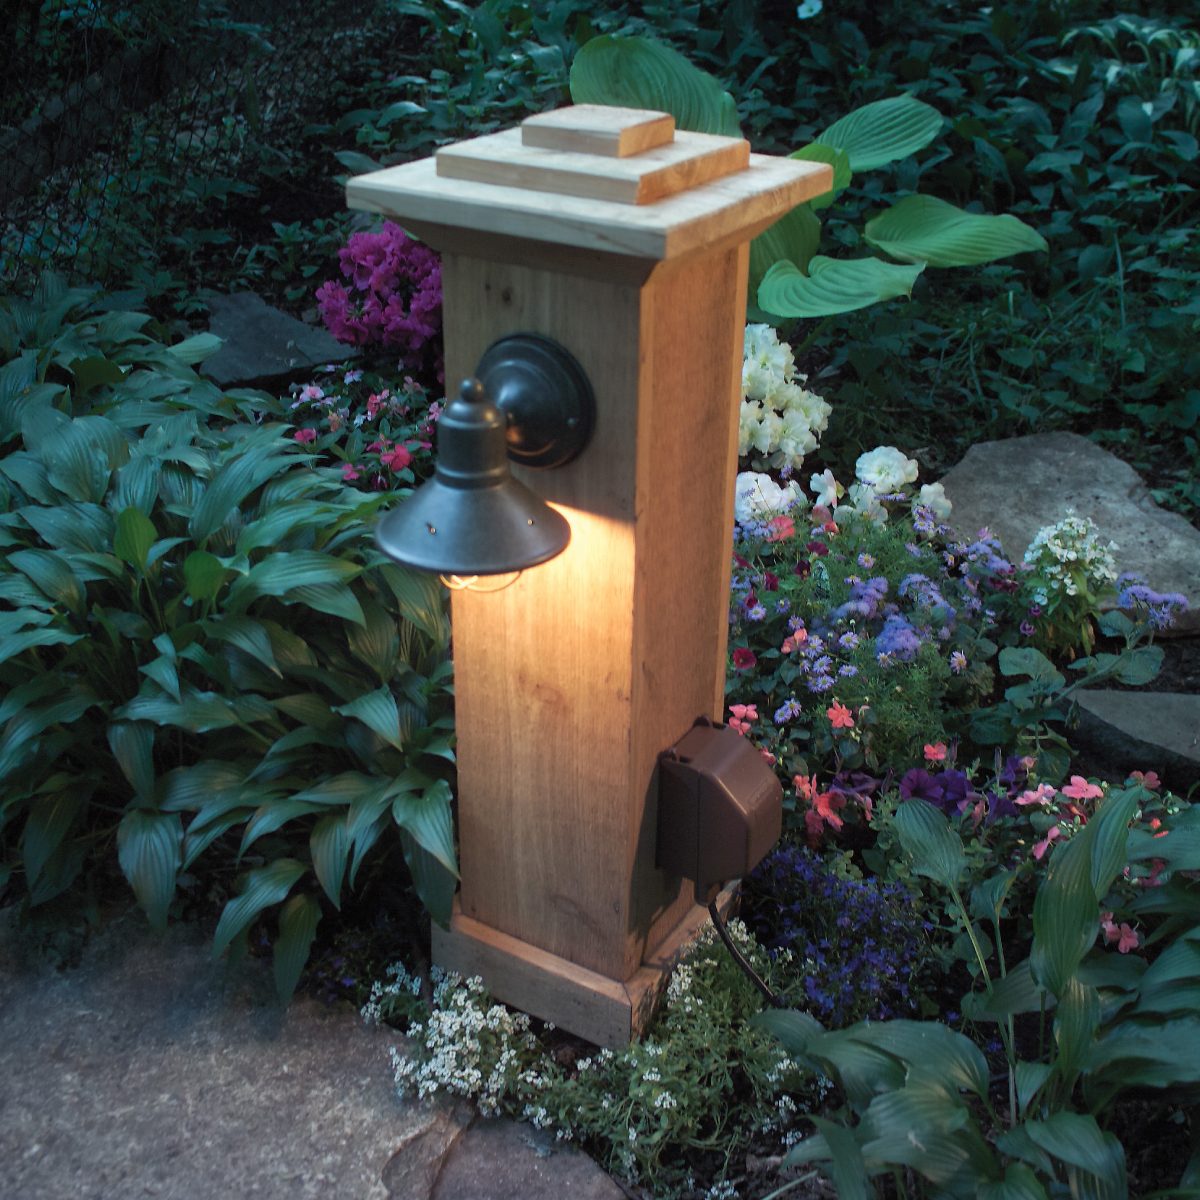 How To Install Outdoor Lighting And An Outlet